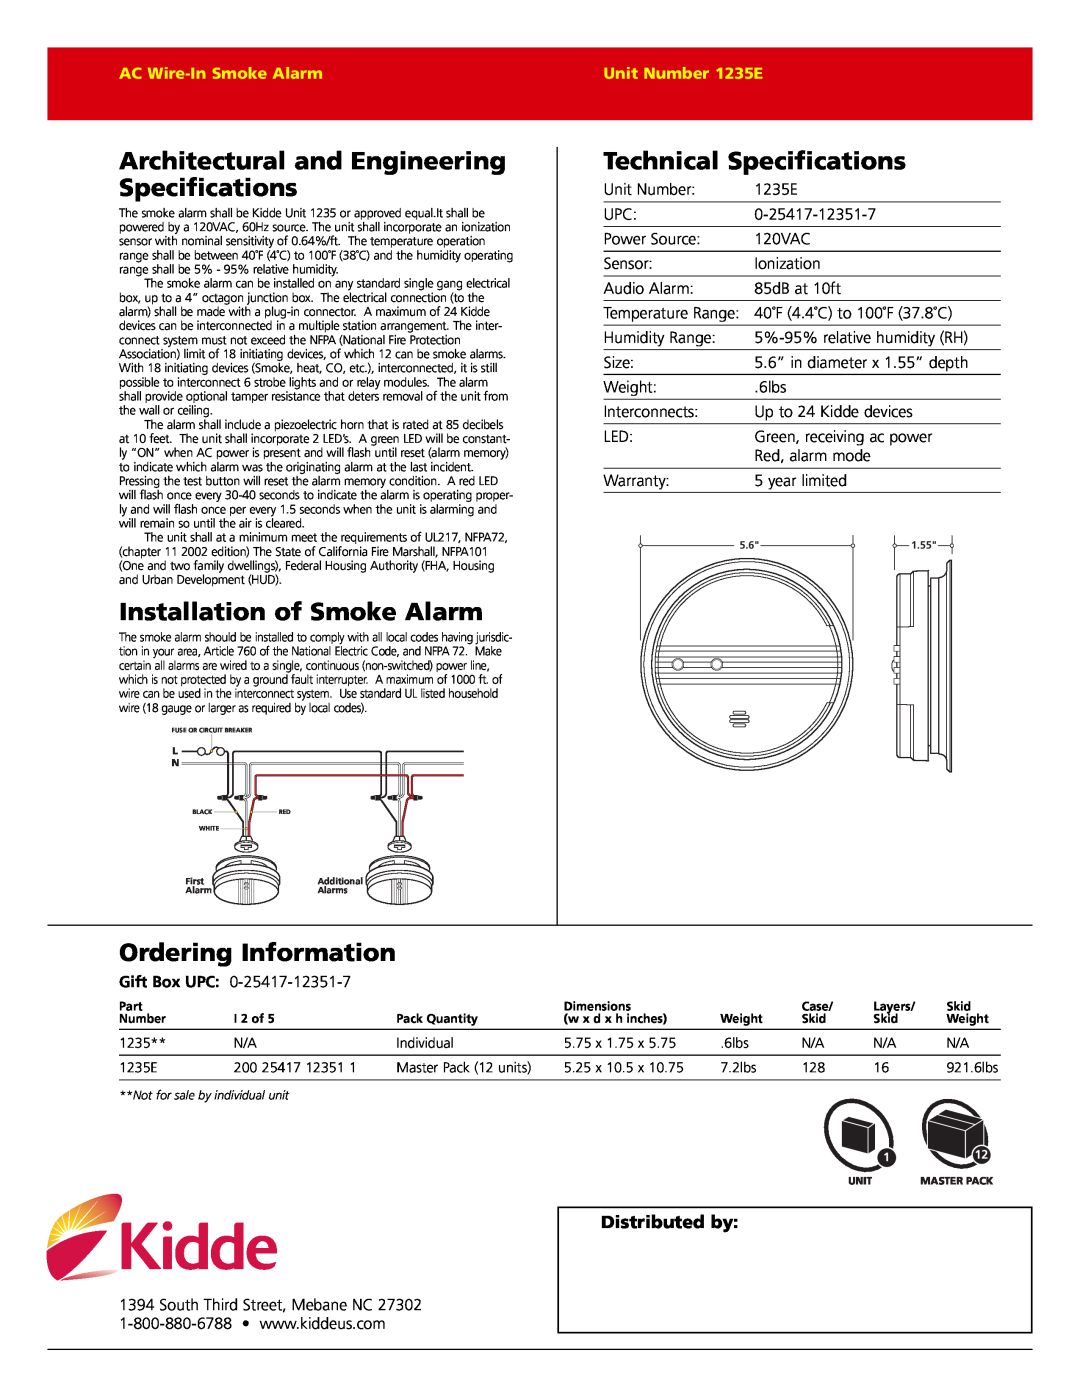 Kidde 1235E warranty Architectural and Engineering Specifications, Installation of Smoke Alarm, Technical Specifications 